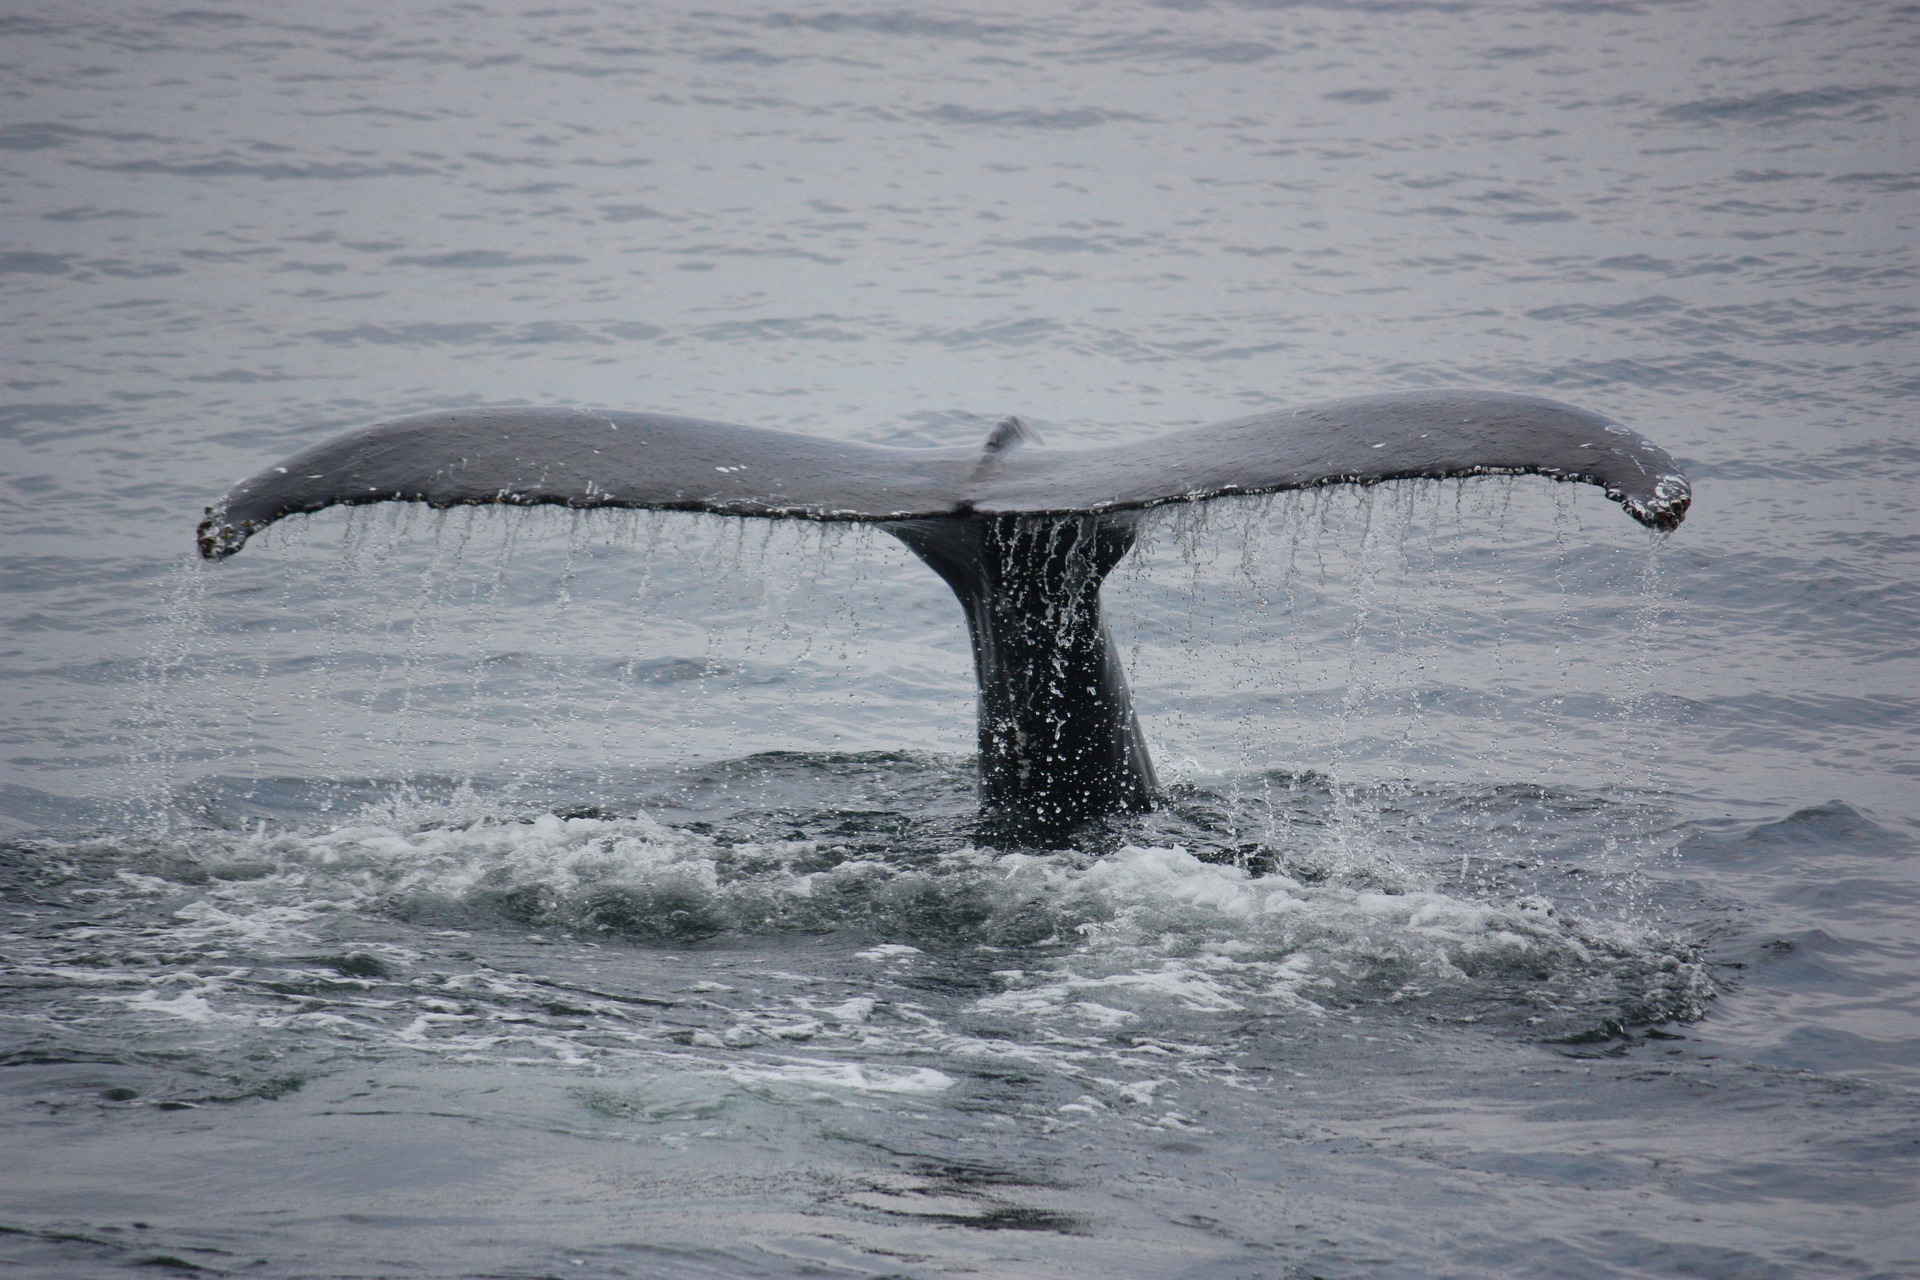 Enjoy some whale watching in Costa Rica